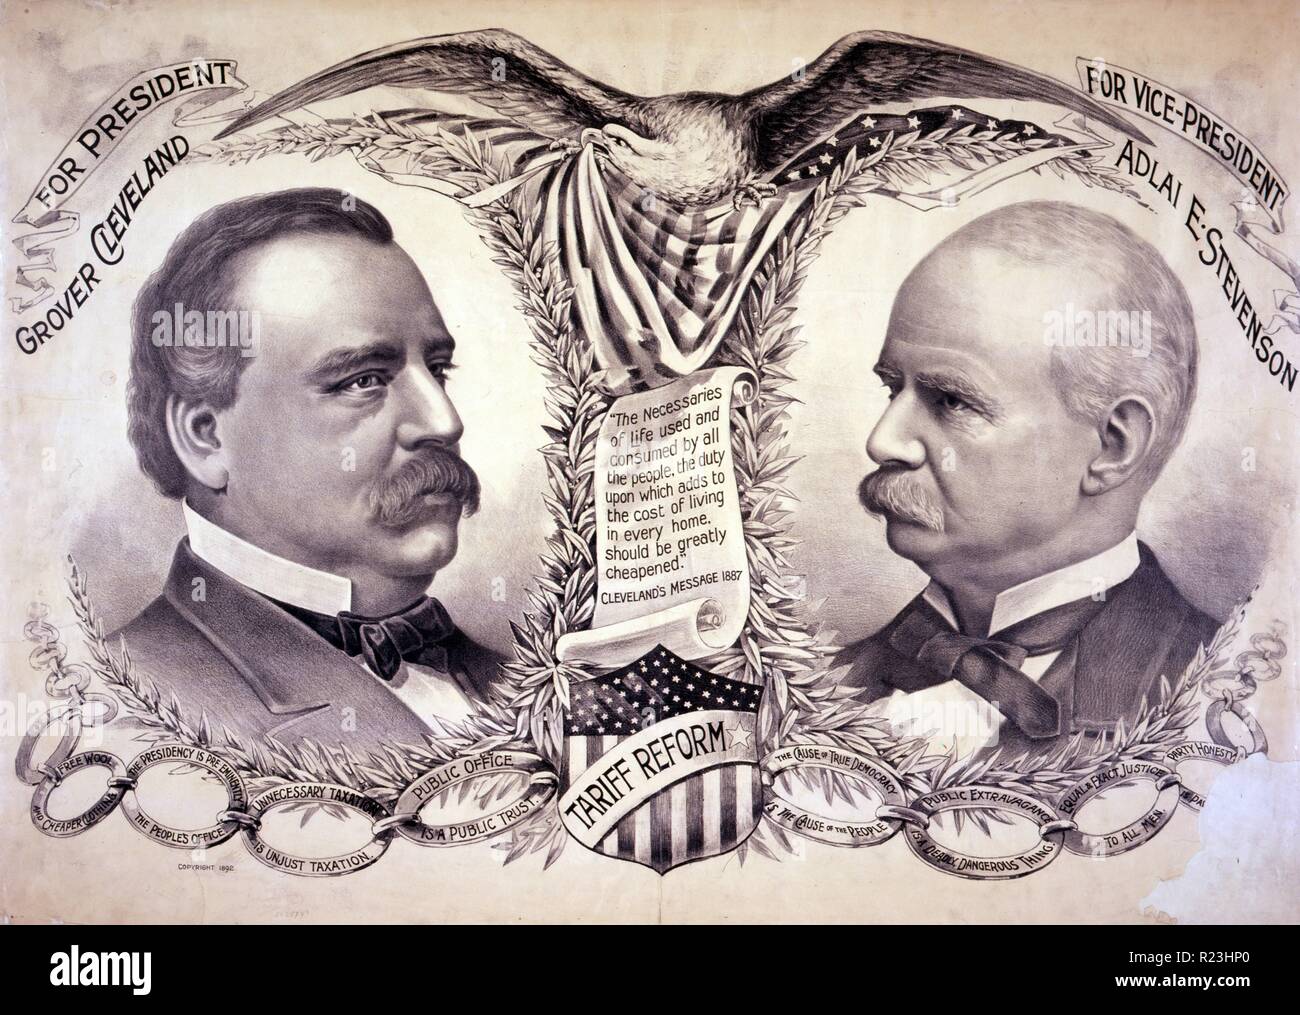 For President, Grover Cleveland, for Vice-President, Adlai E. Stevenson. Political poster shows bust portraits of candidates with campaign slogans. 1892 Stock Photo